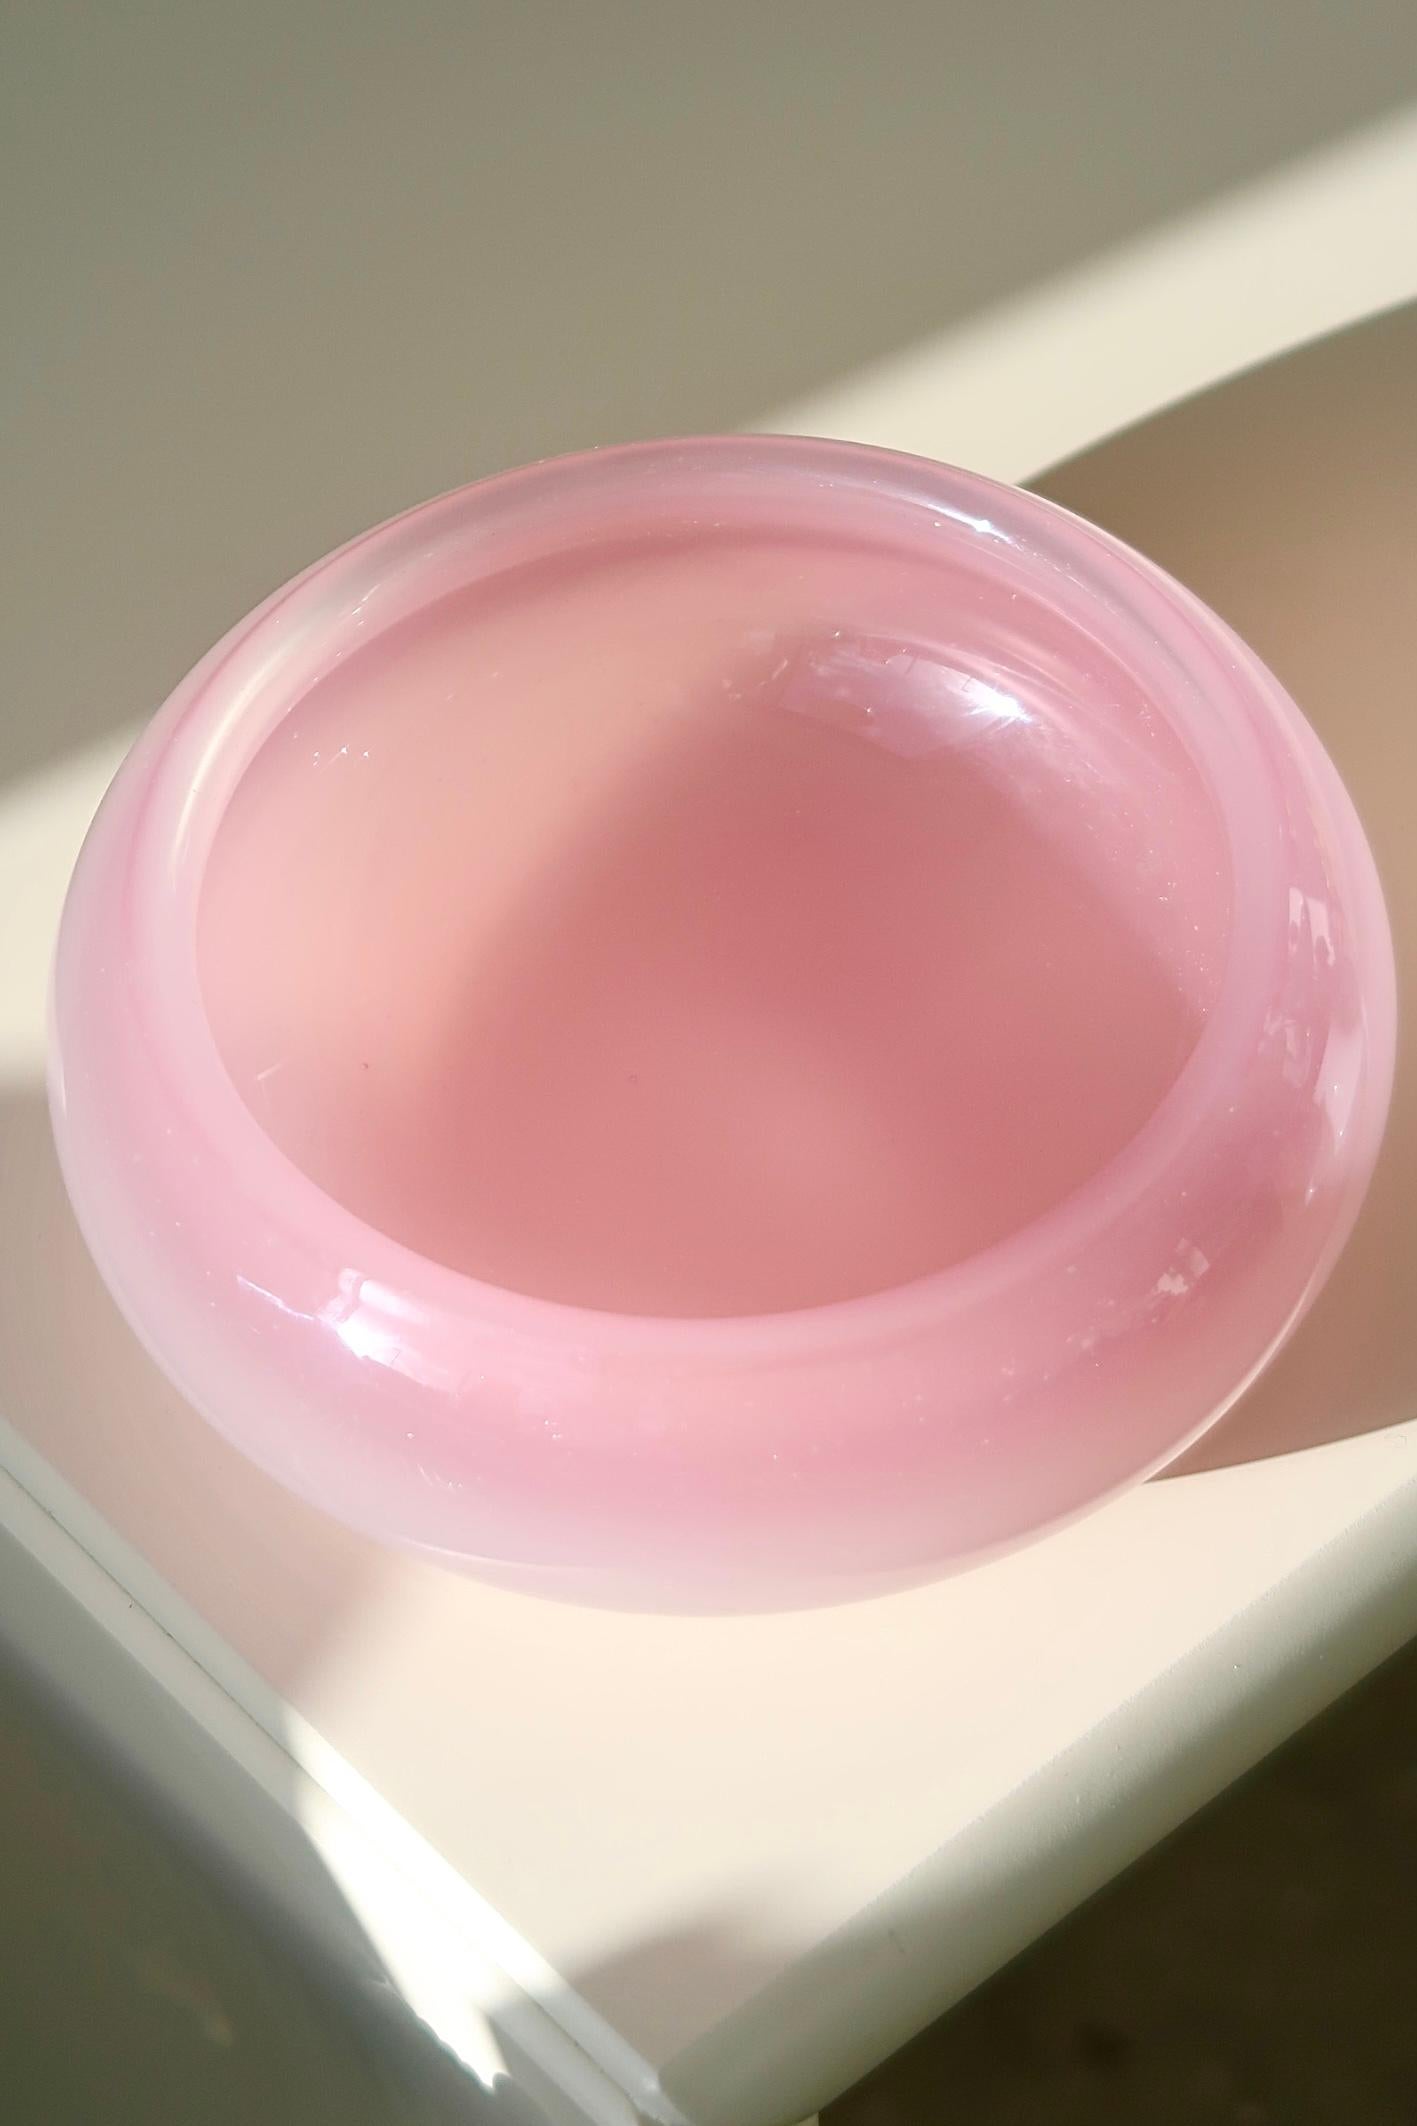 Vintage Murano pink alabaster glass bowl. The bowl is mouth-blown in solid glass and has a perfect size. Very little wear considering the age. Handmade in Italy, 1960s. D: 15 cm H: 7 cm.